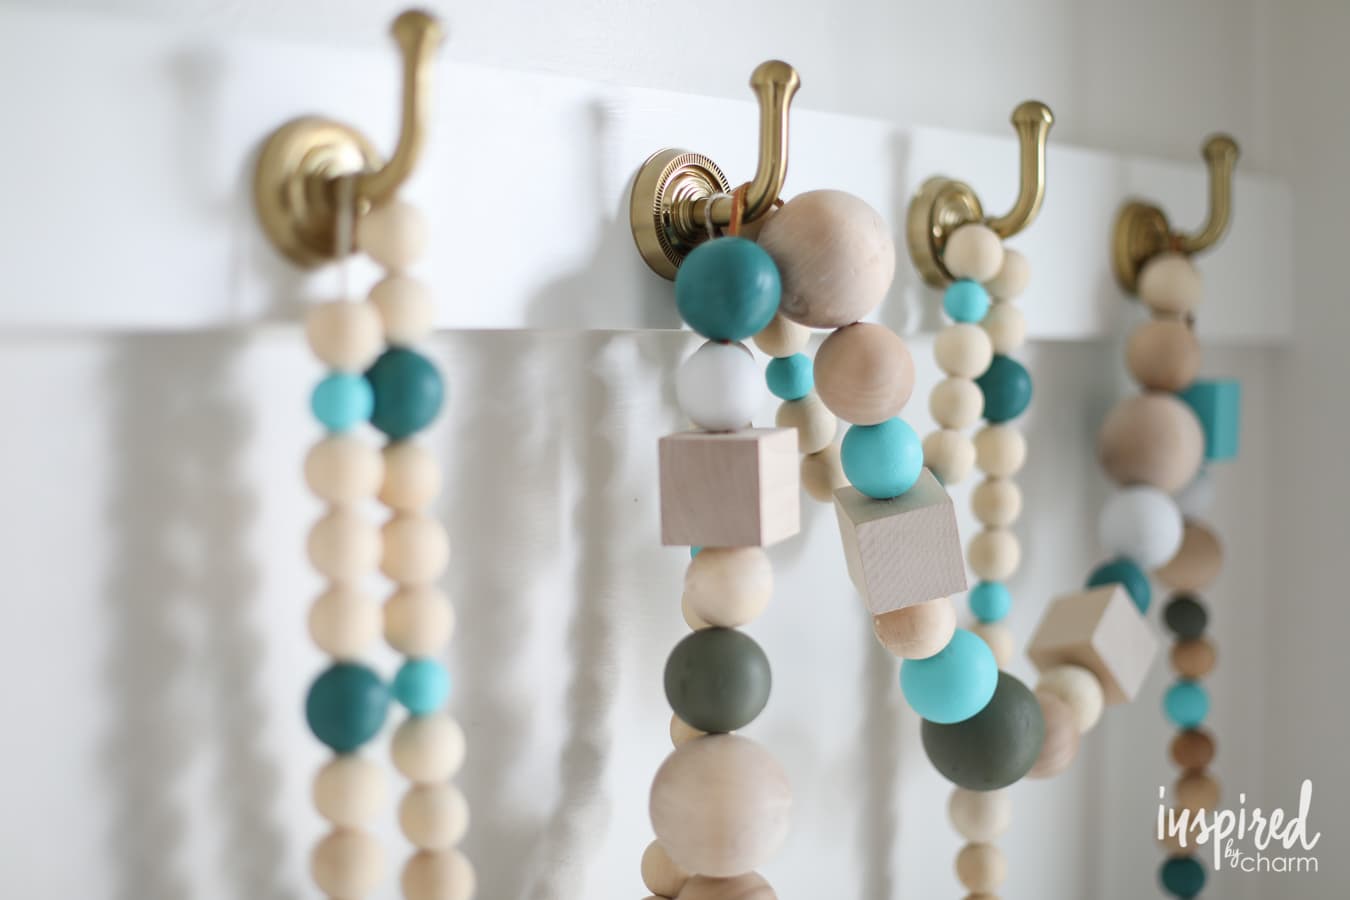 DIY Wood Styling Beads create colorful Scandinavian style with this colorful project.